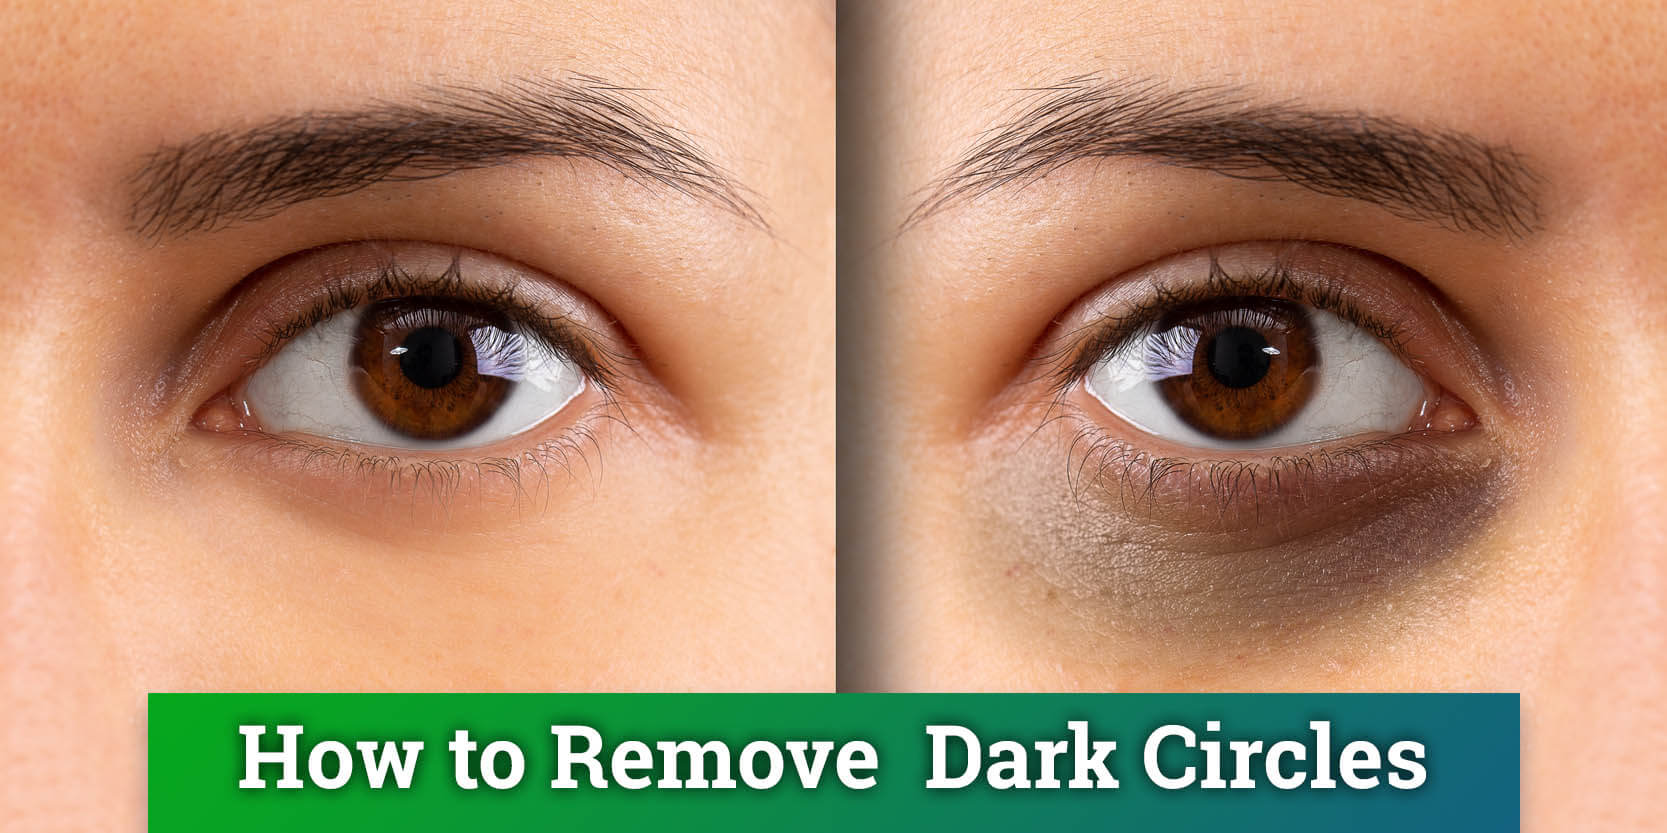 How To Get Rid of Those Dark Circles Under Your Eyes